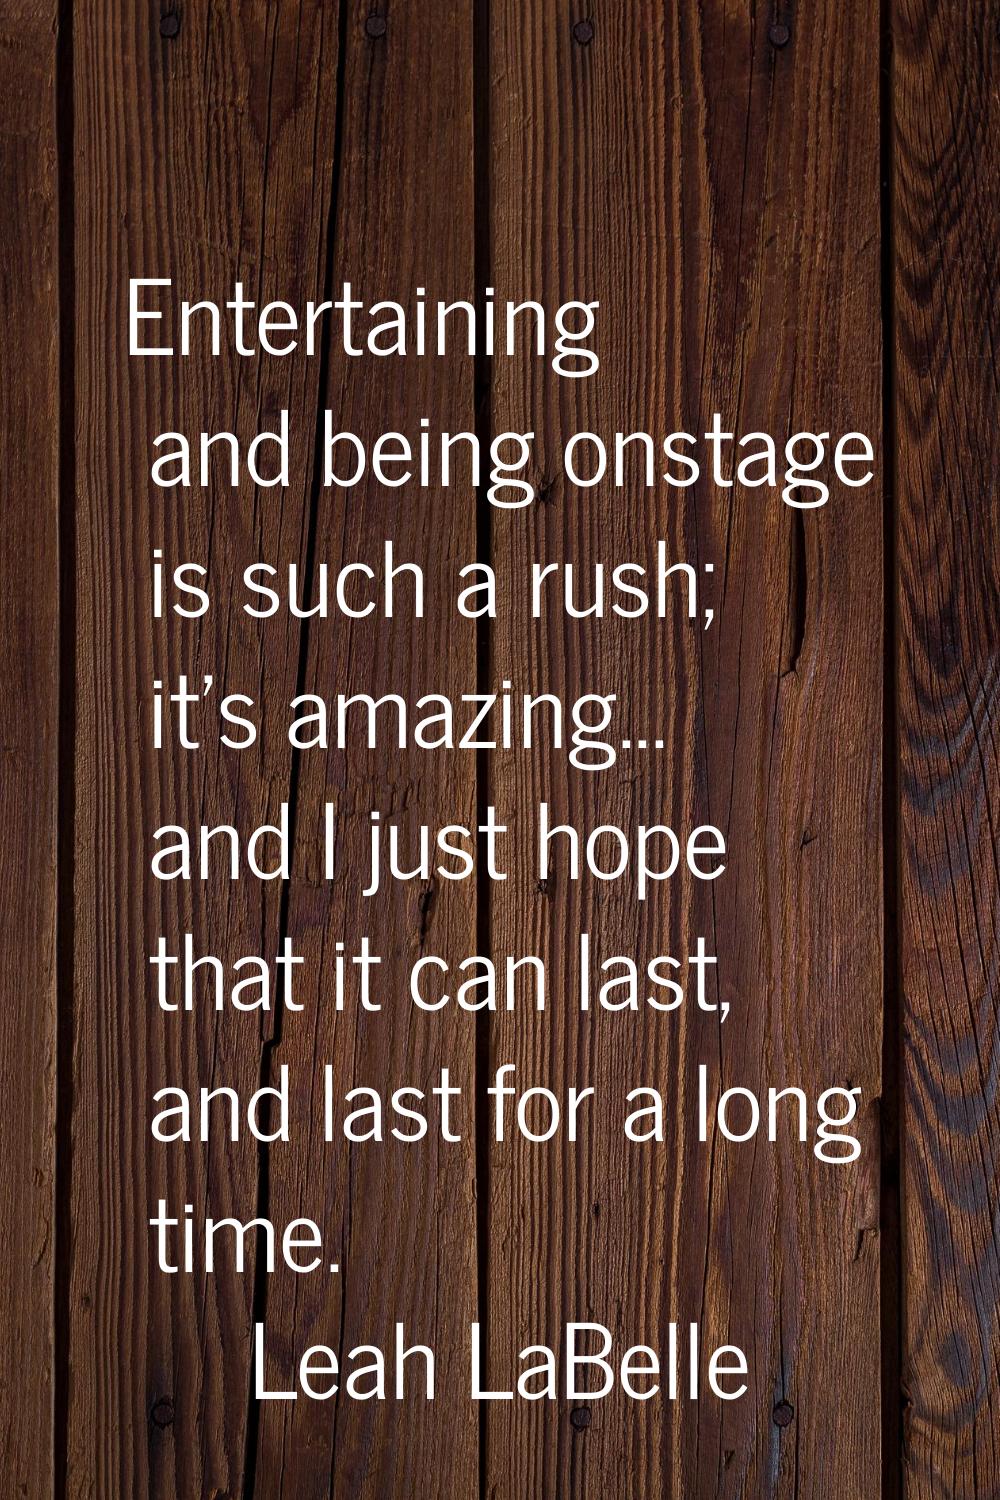 Entertaining and being onstage is such a rush; it's amazing... and I just hope that it can last, an